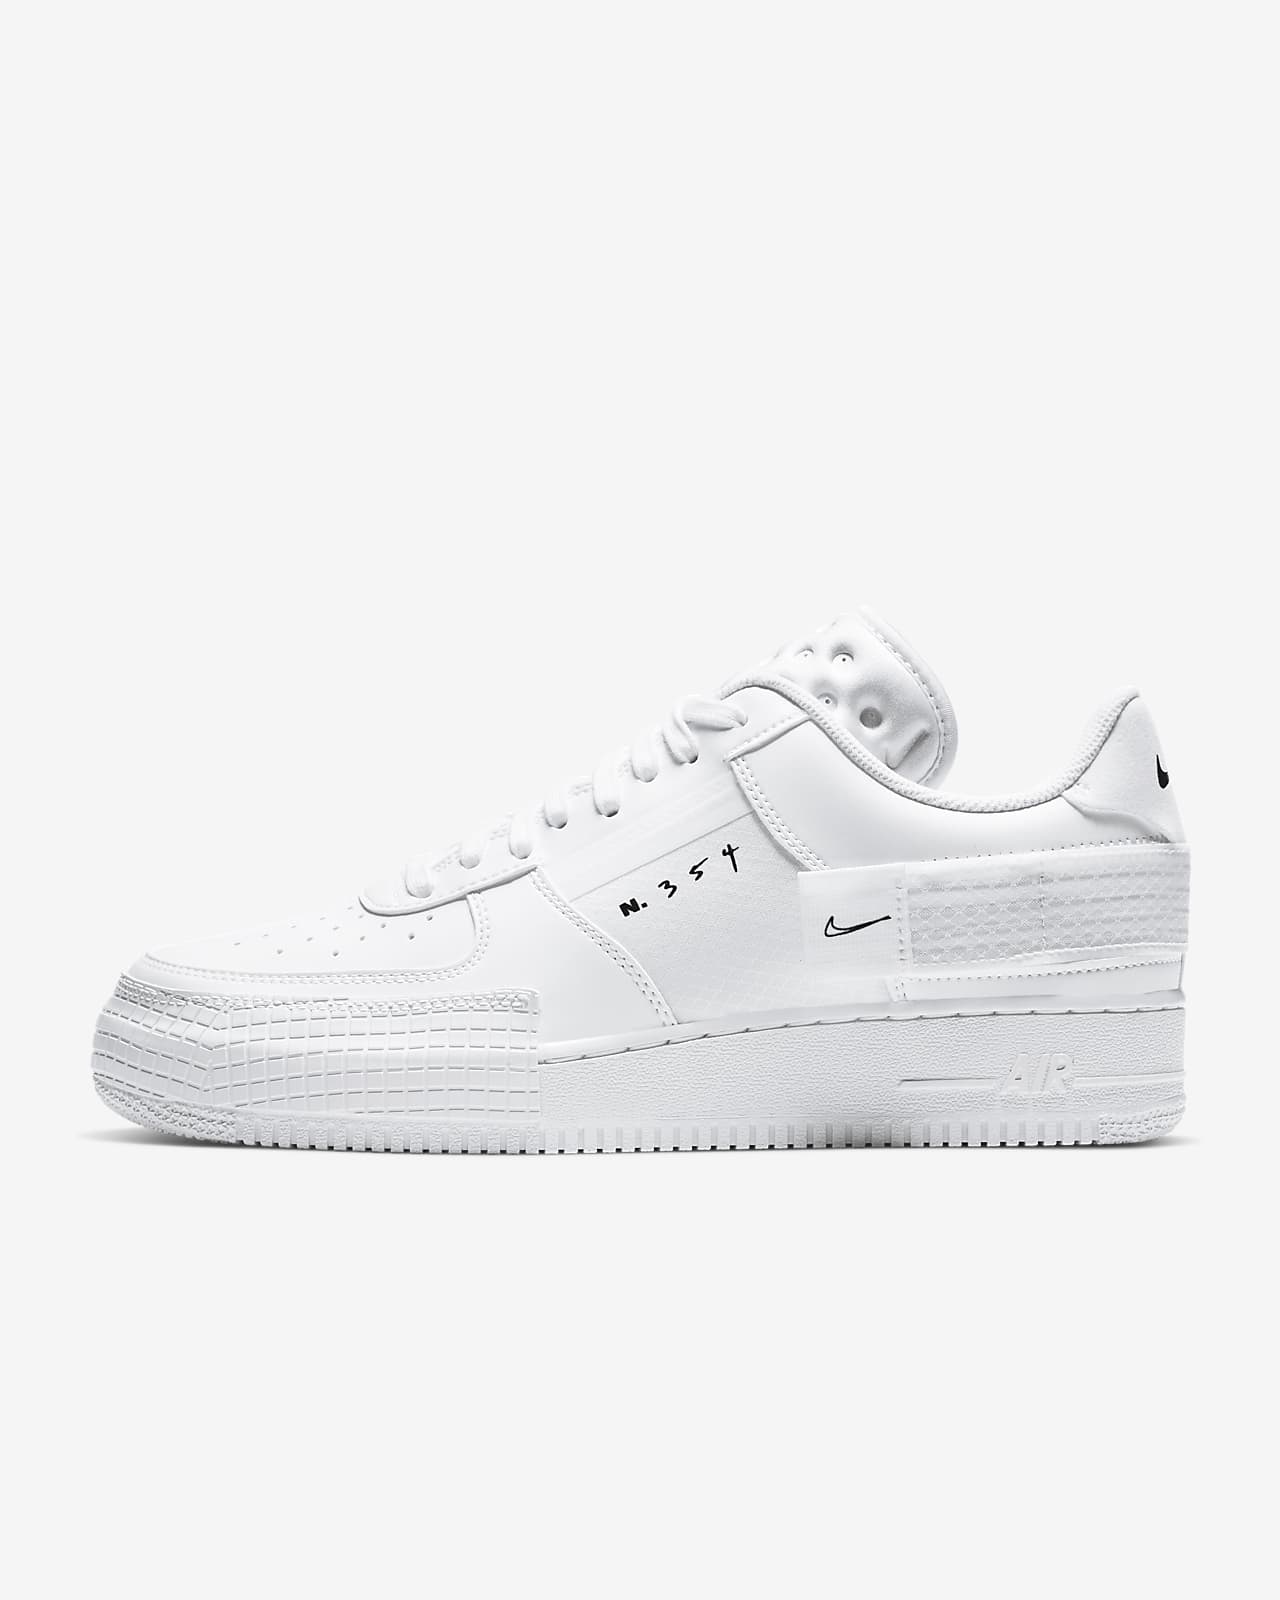 size 12 air force ones